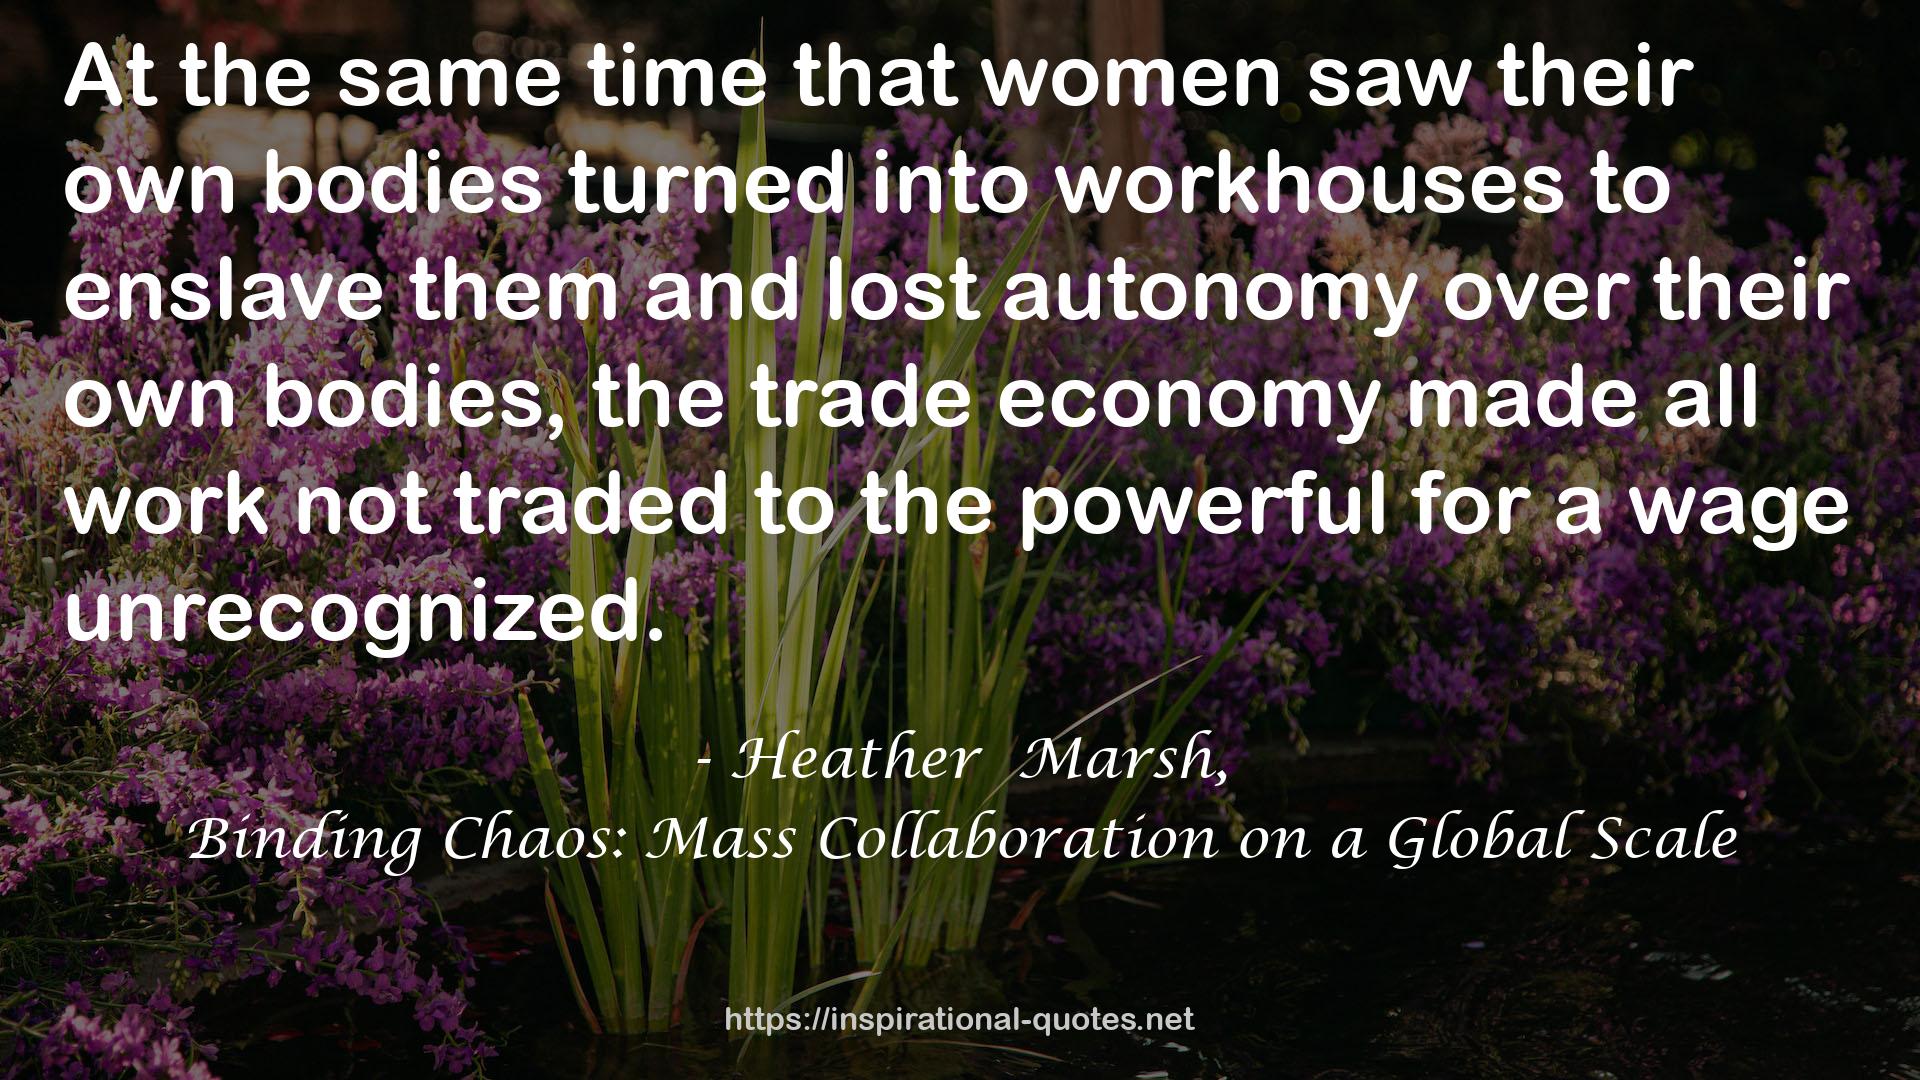 Binding Chaos: Mass Collaboration on a Global Scale QUOTES